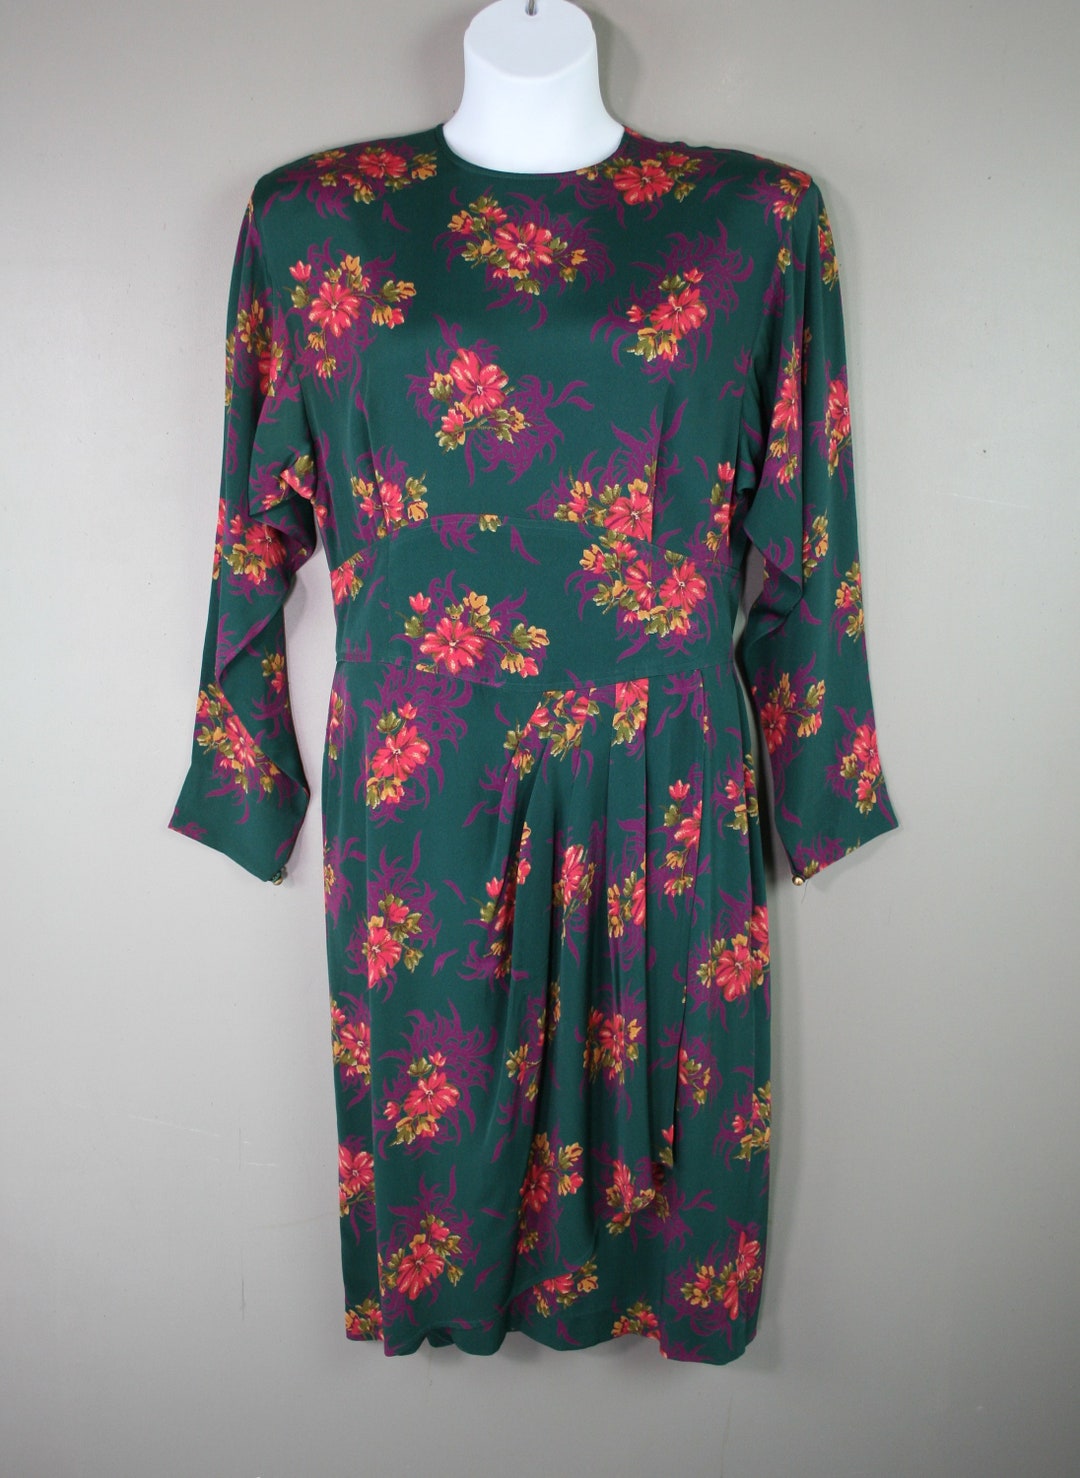 Fall Floral Liz Claiborne Circa 1990s Forest Green - Etsy